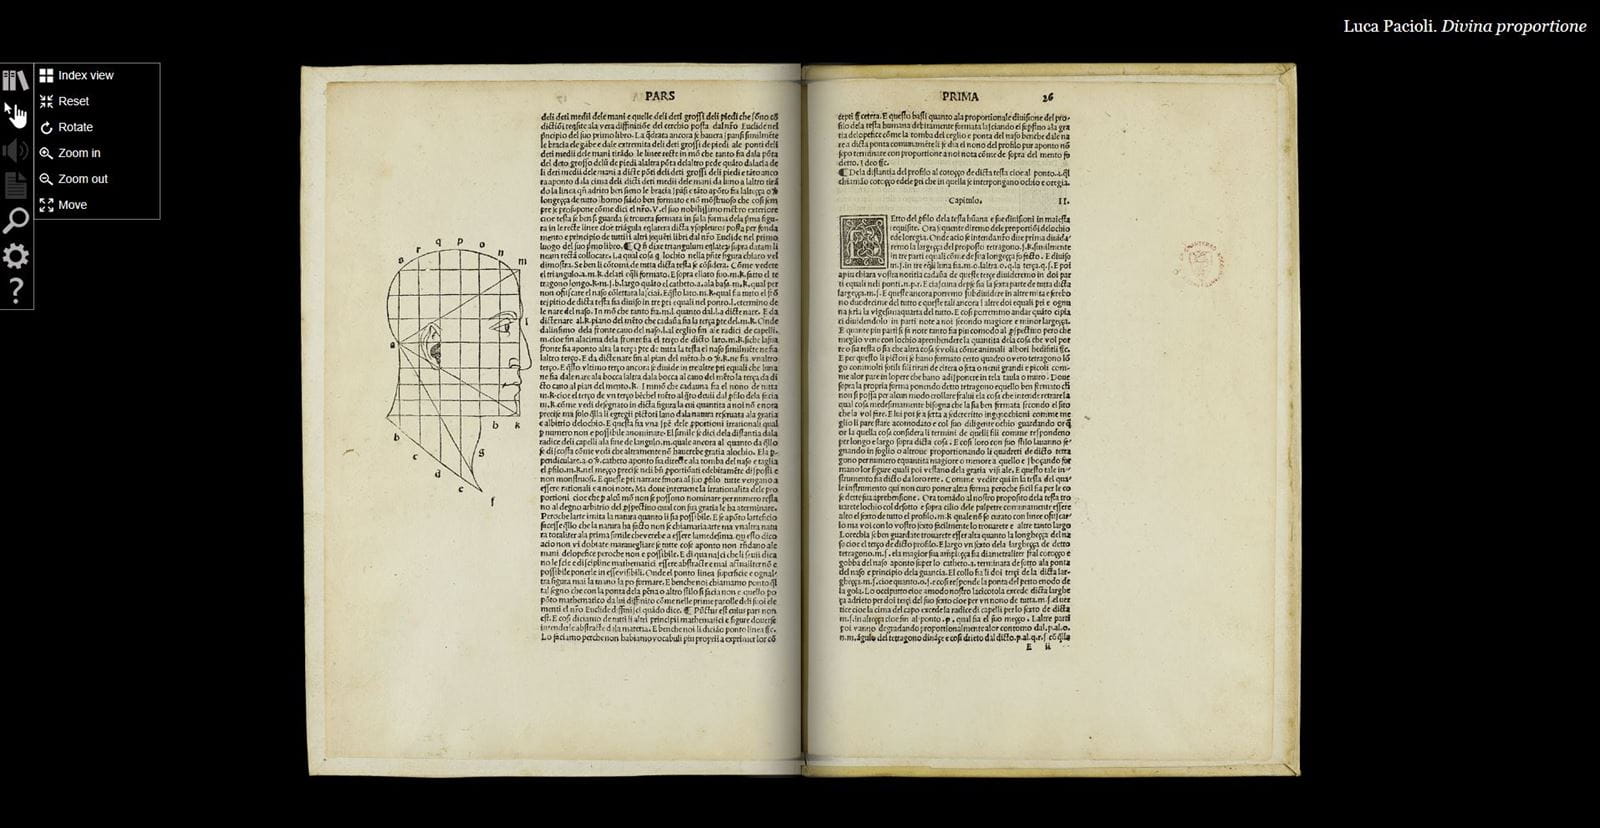 A view of an ICAEW rare book through the Turning The Pages interactive tool